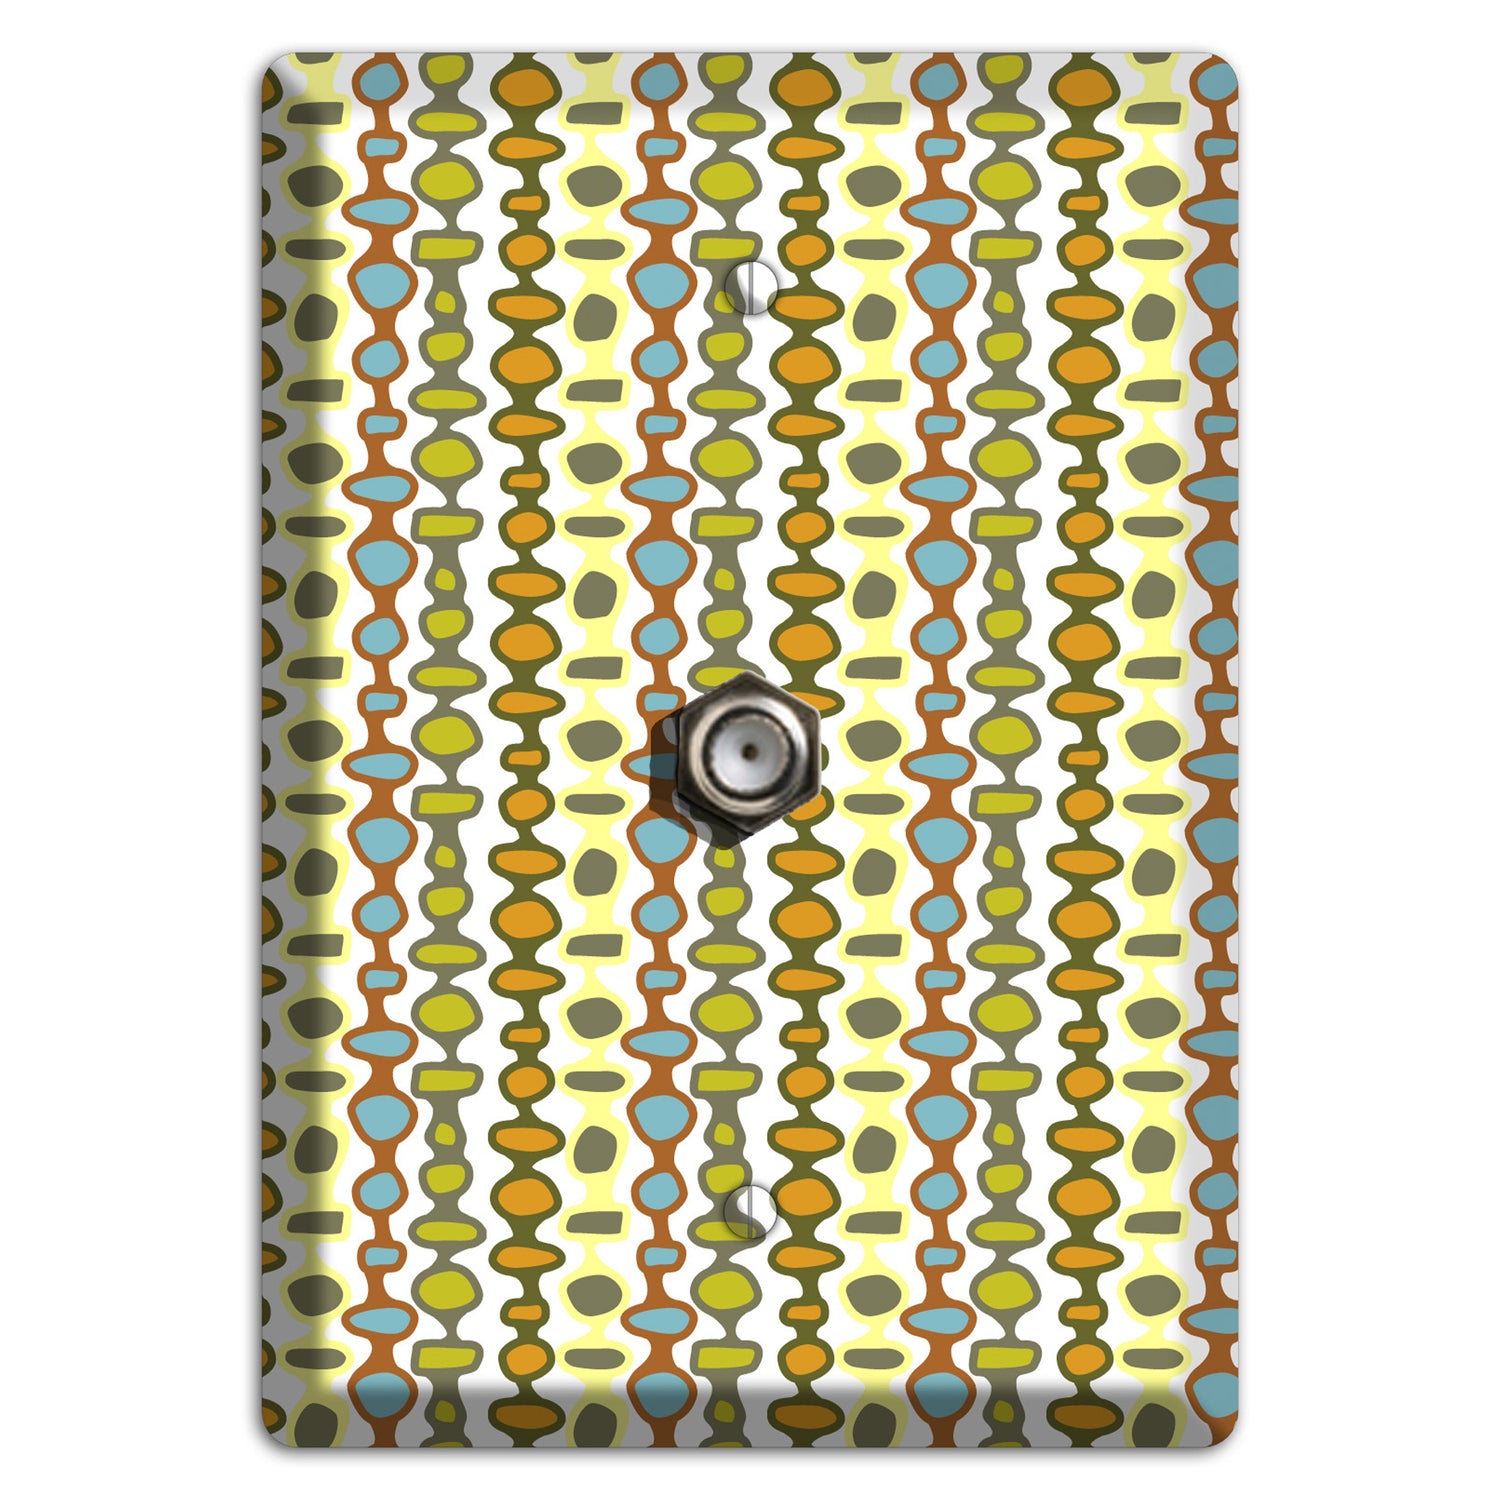 Multi Grey and Umber Bead and Reel Cable Wallplate